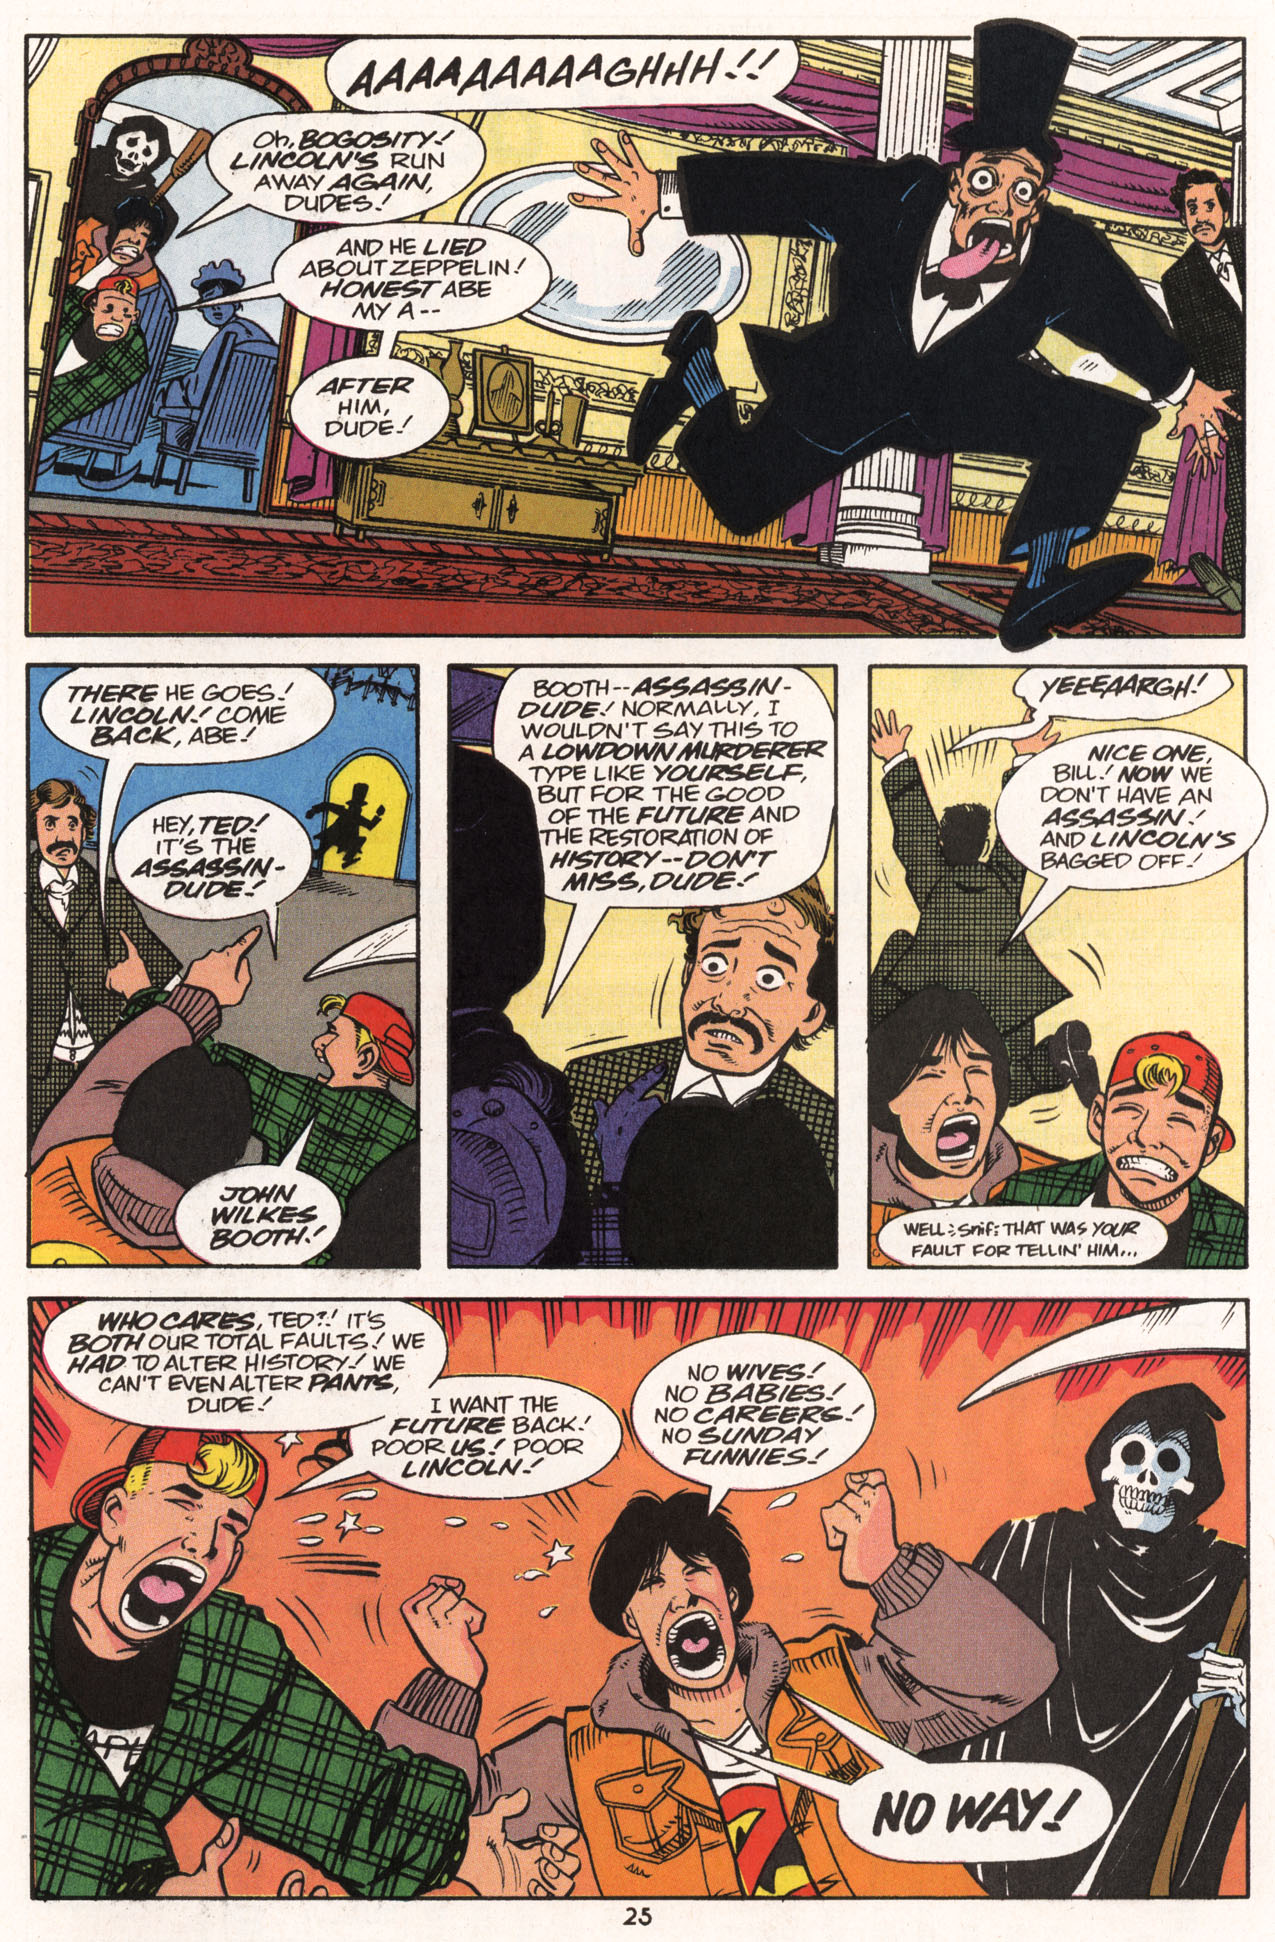 Read online Bill & Ted's Excellent Comic Book comic -  Issue #11 - 24